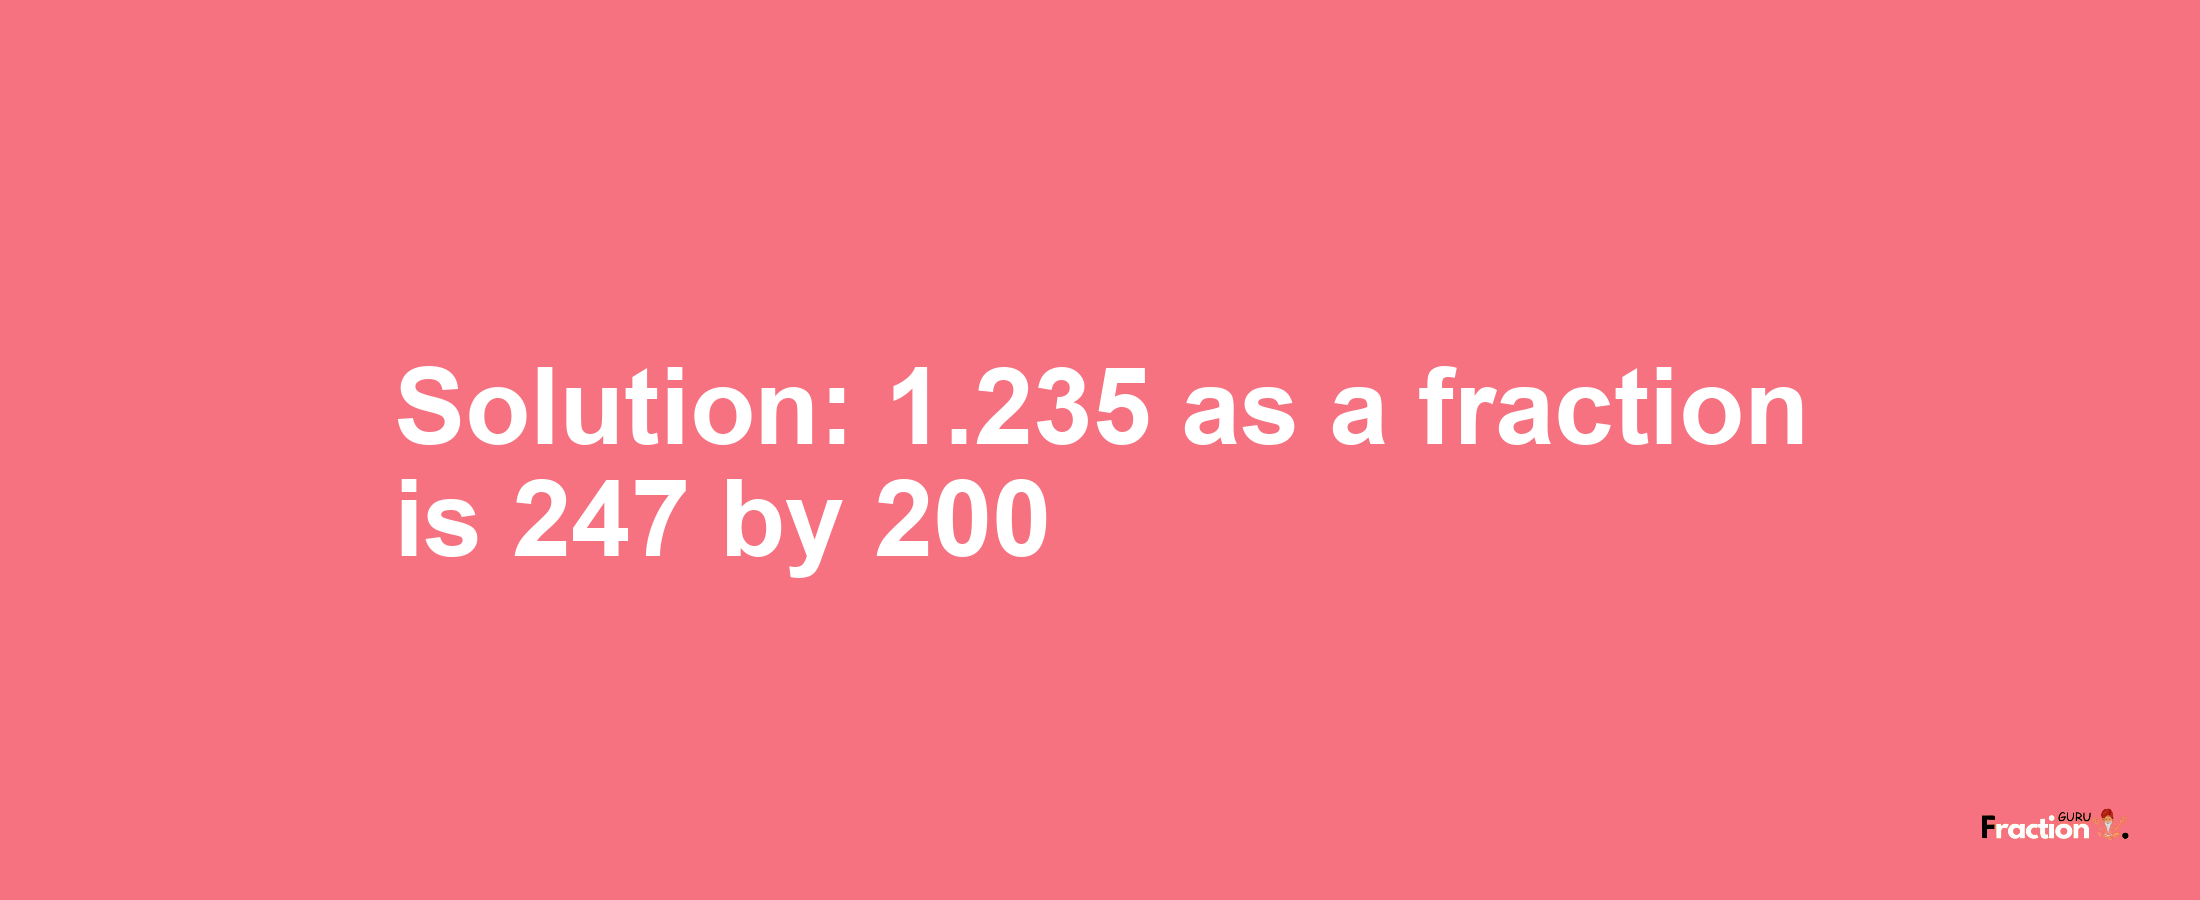 Solution:1.235 as a fraction is 247/200